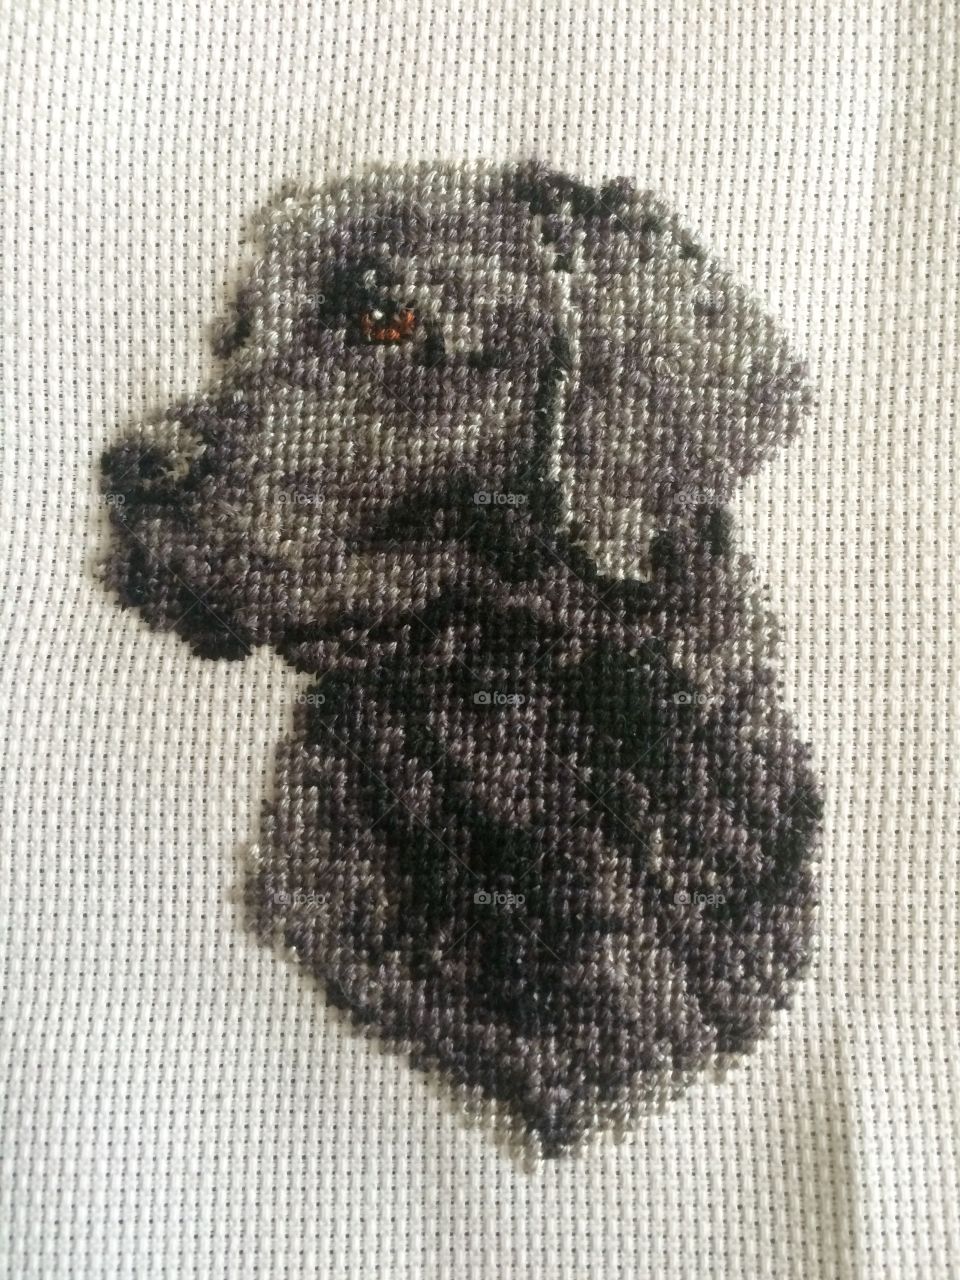 Cross stitch I have just finished for my Dad's birthday. We have a black Labrador called Shadow 